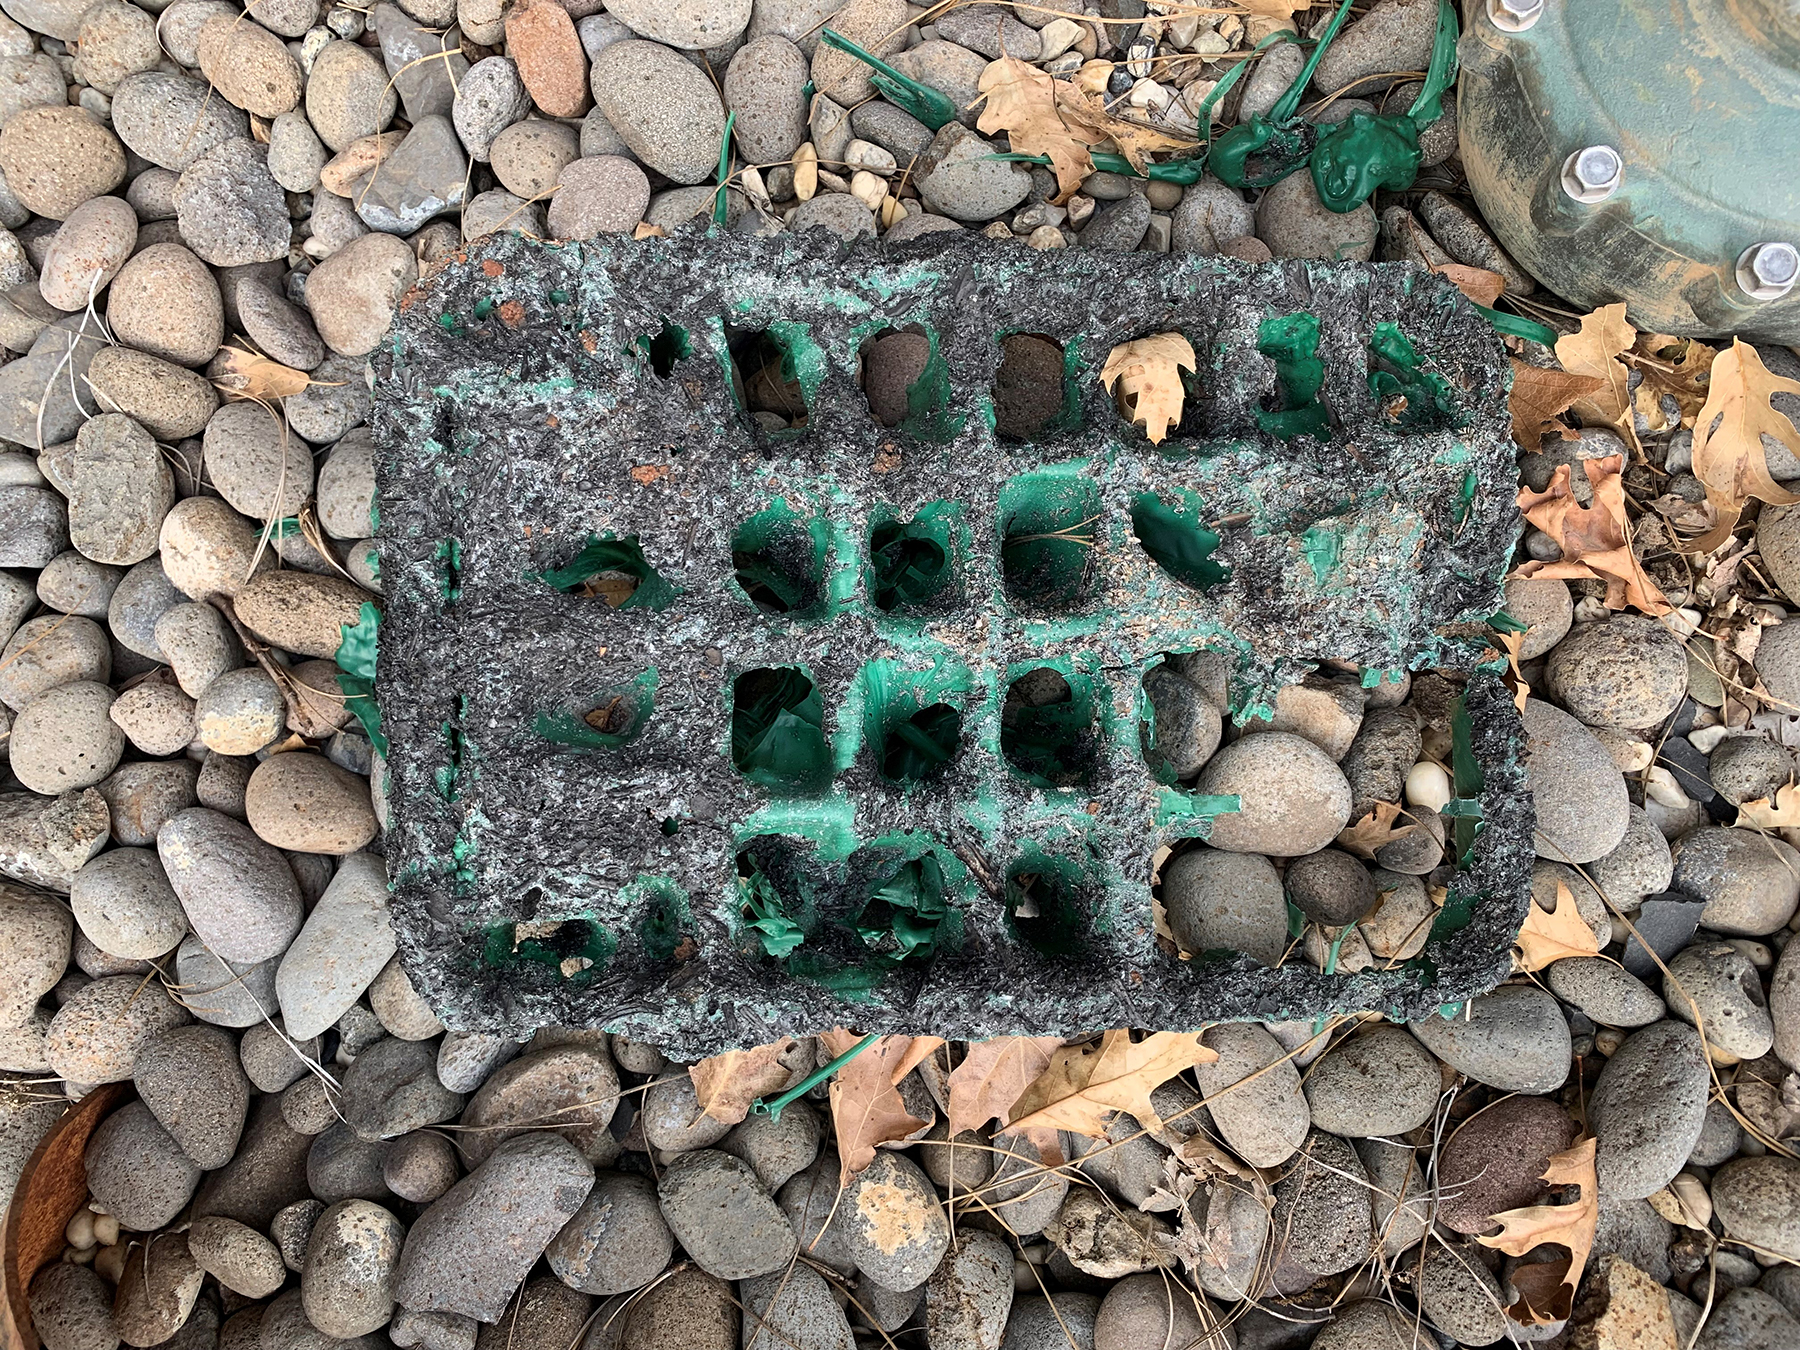 Plastic components within drinking water distribution systems can thermally degrade during a wildfire, potentially releasing contaminants into the systems. (Courtesy of Erica Fischer) 